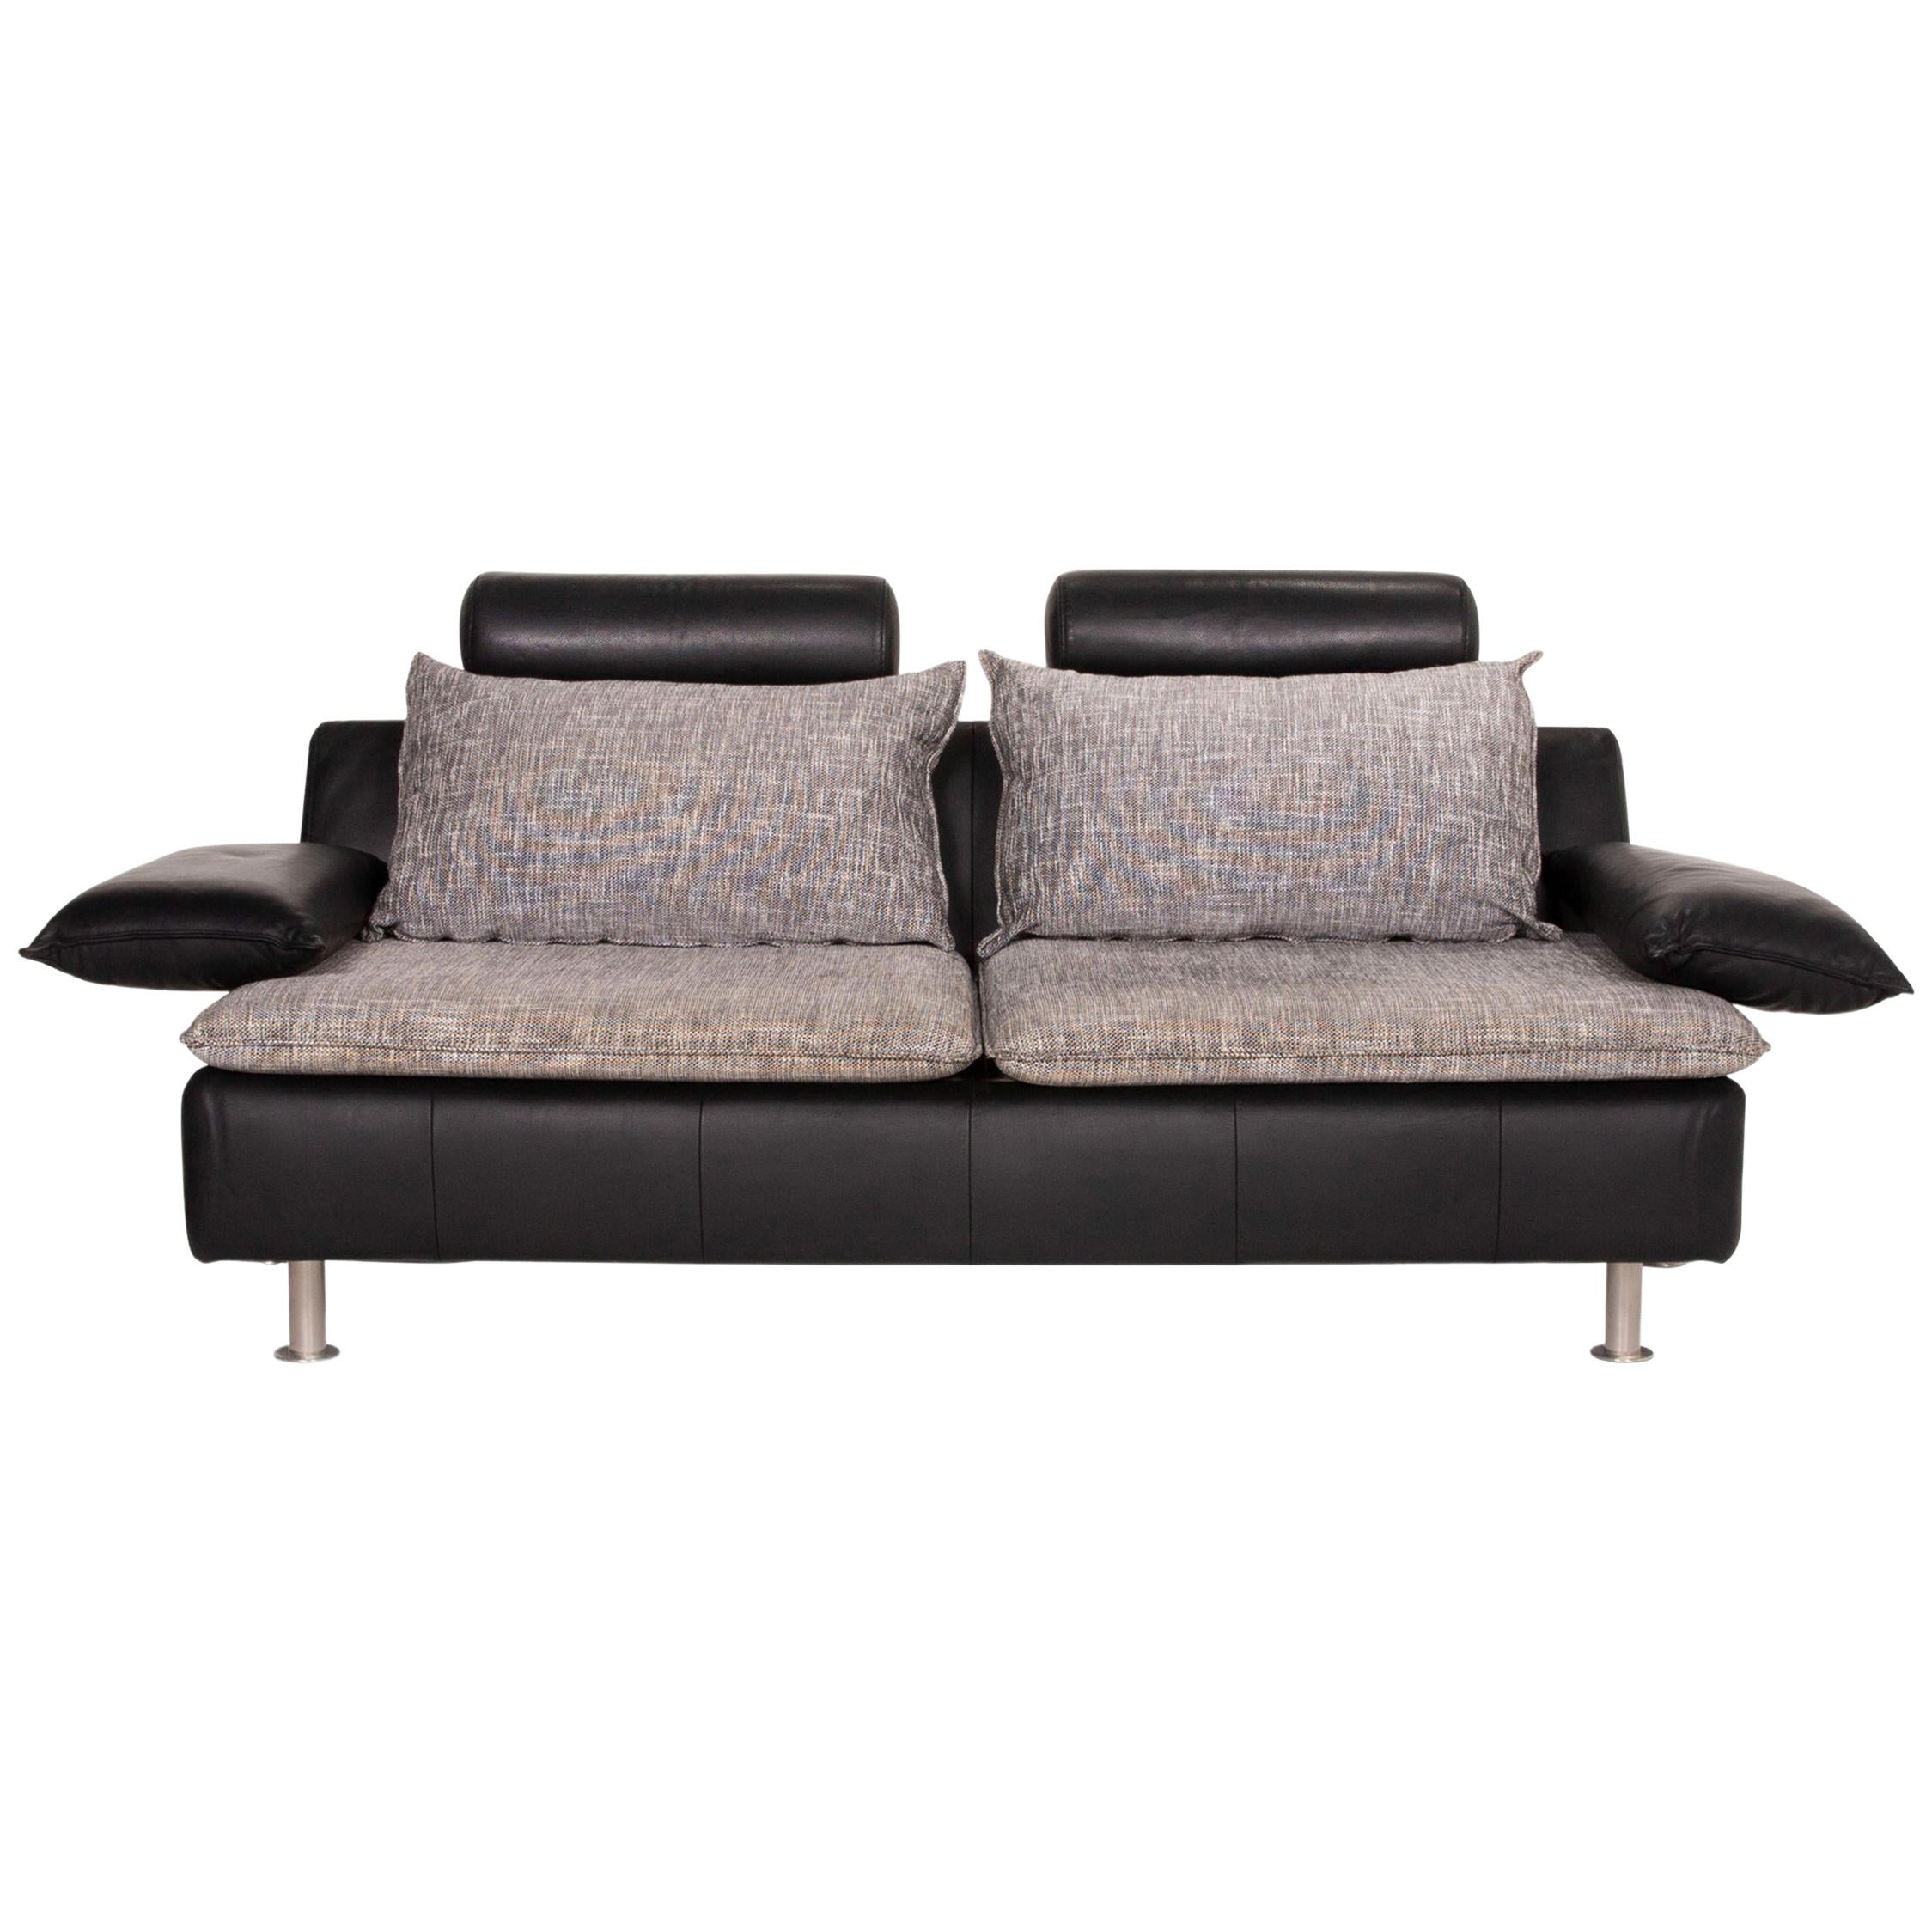 Möller Design Tayo Leather Sofa Black Two-Seat Couch